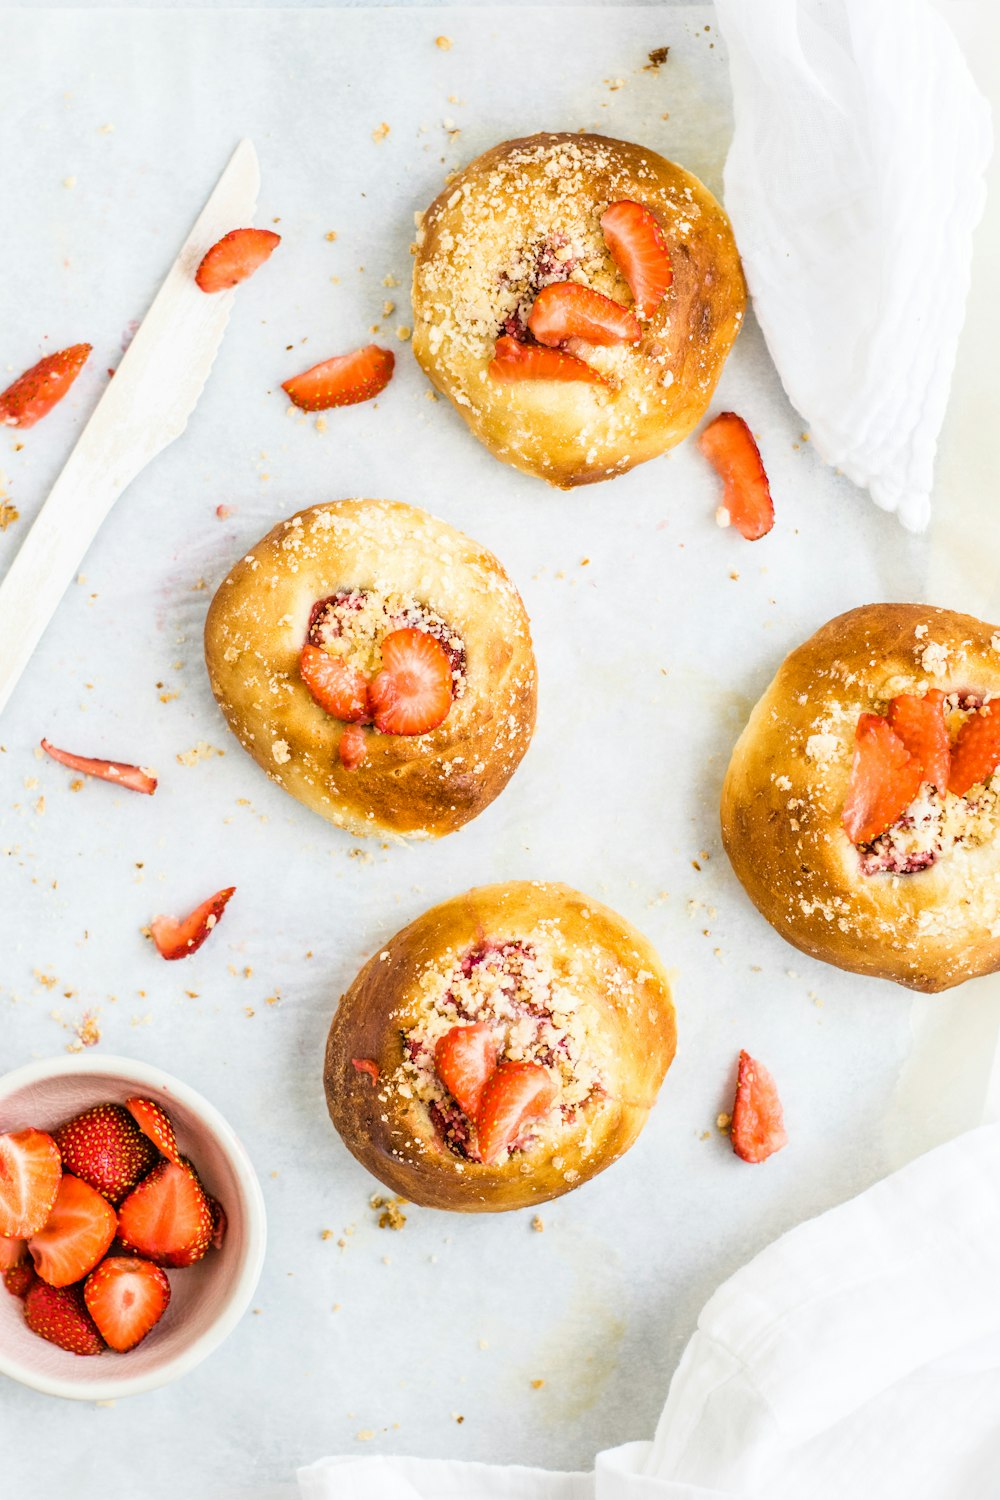 four breads with strawberry toppings